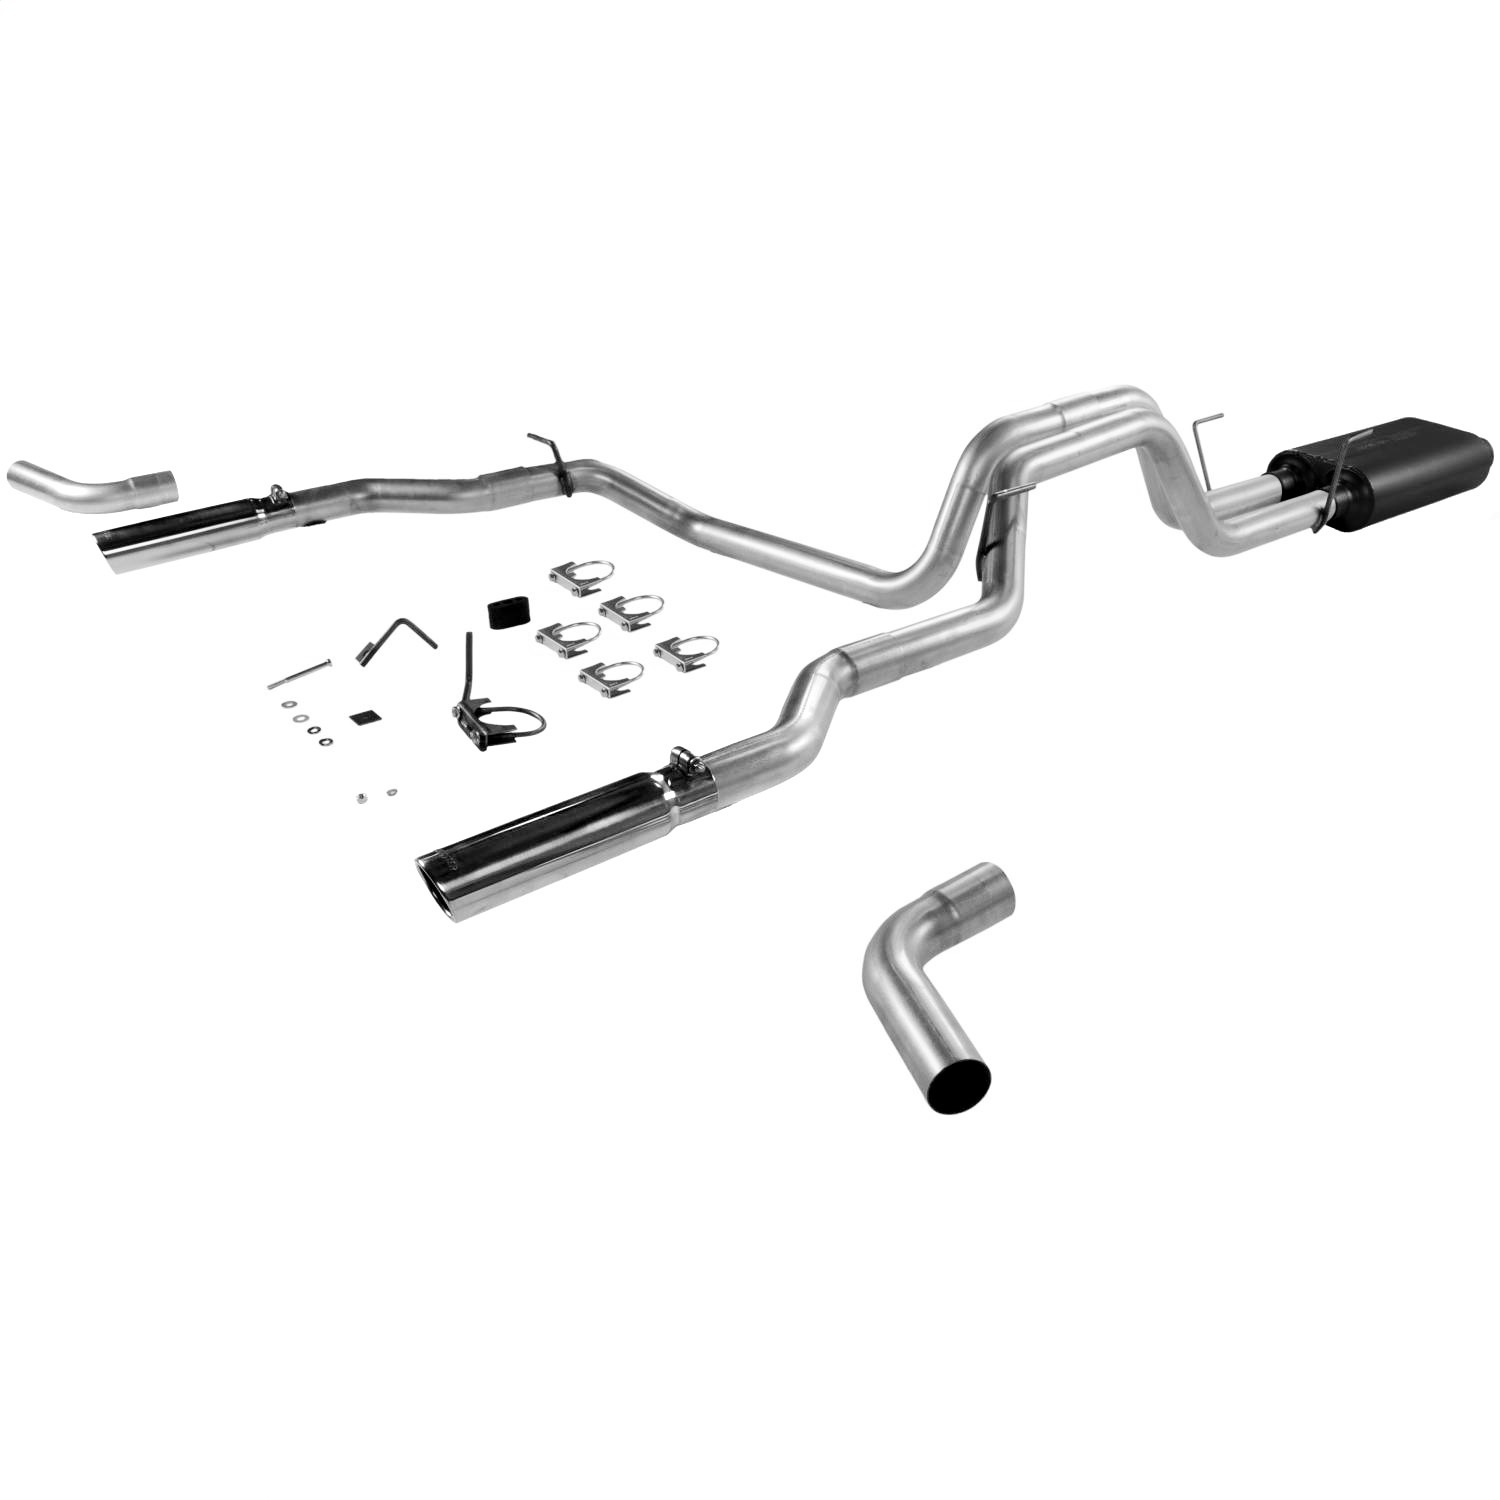 Flowmaster Flowmaster 17375 American Thunder Cat Back Exhaust System Fits 03 Ram 1500